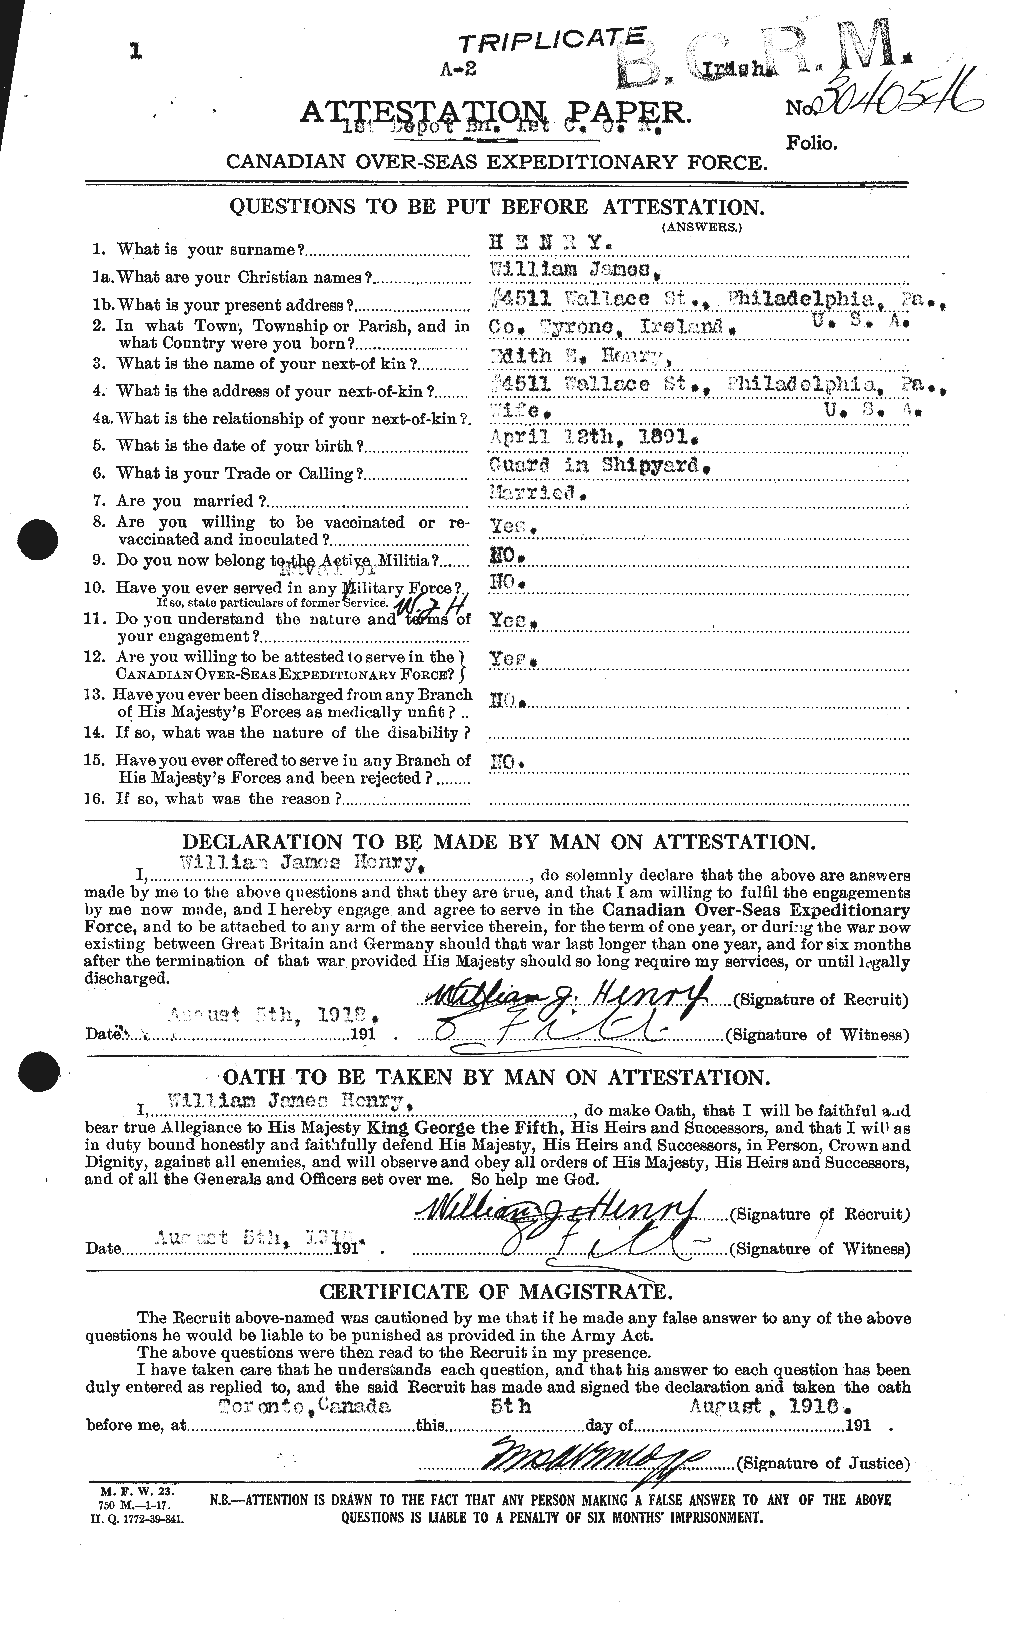 Personnel Records of the First World War - CEF 387780a